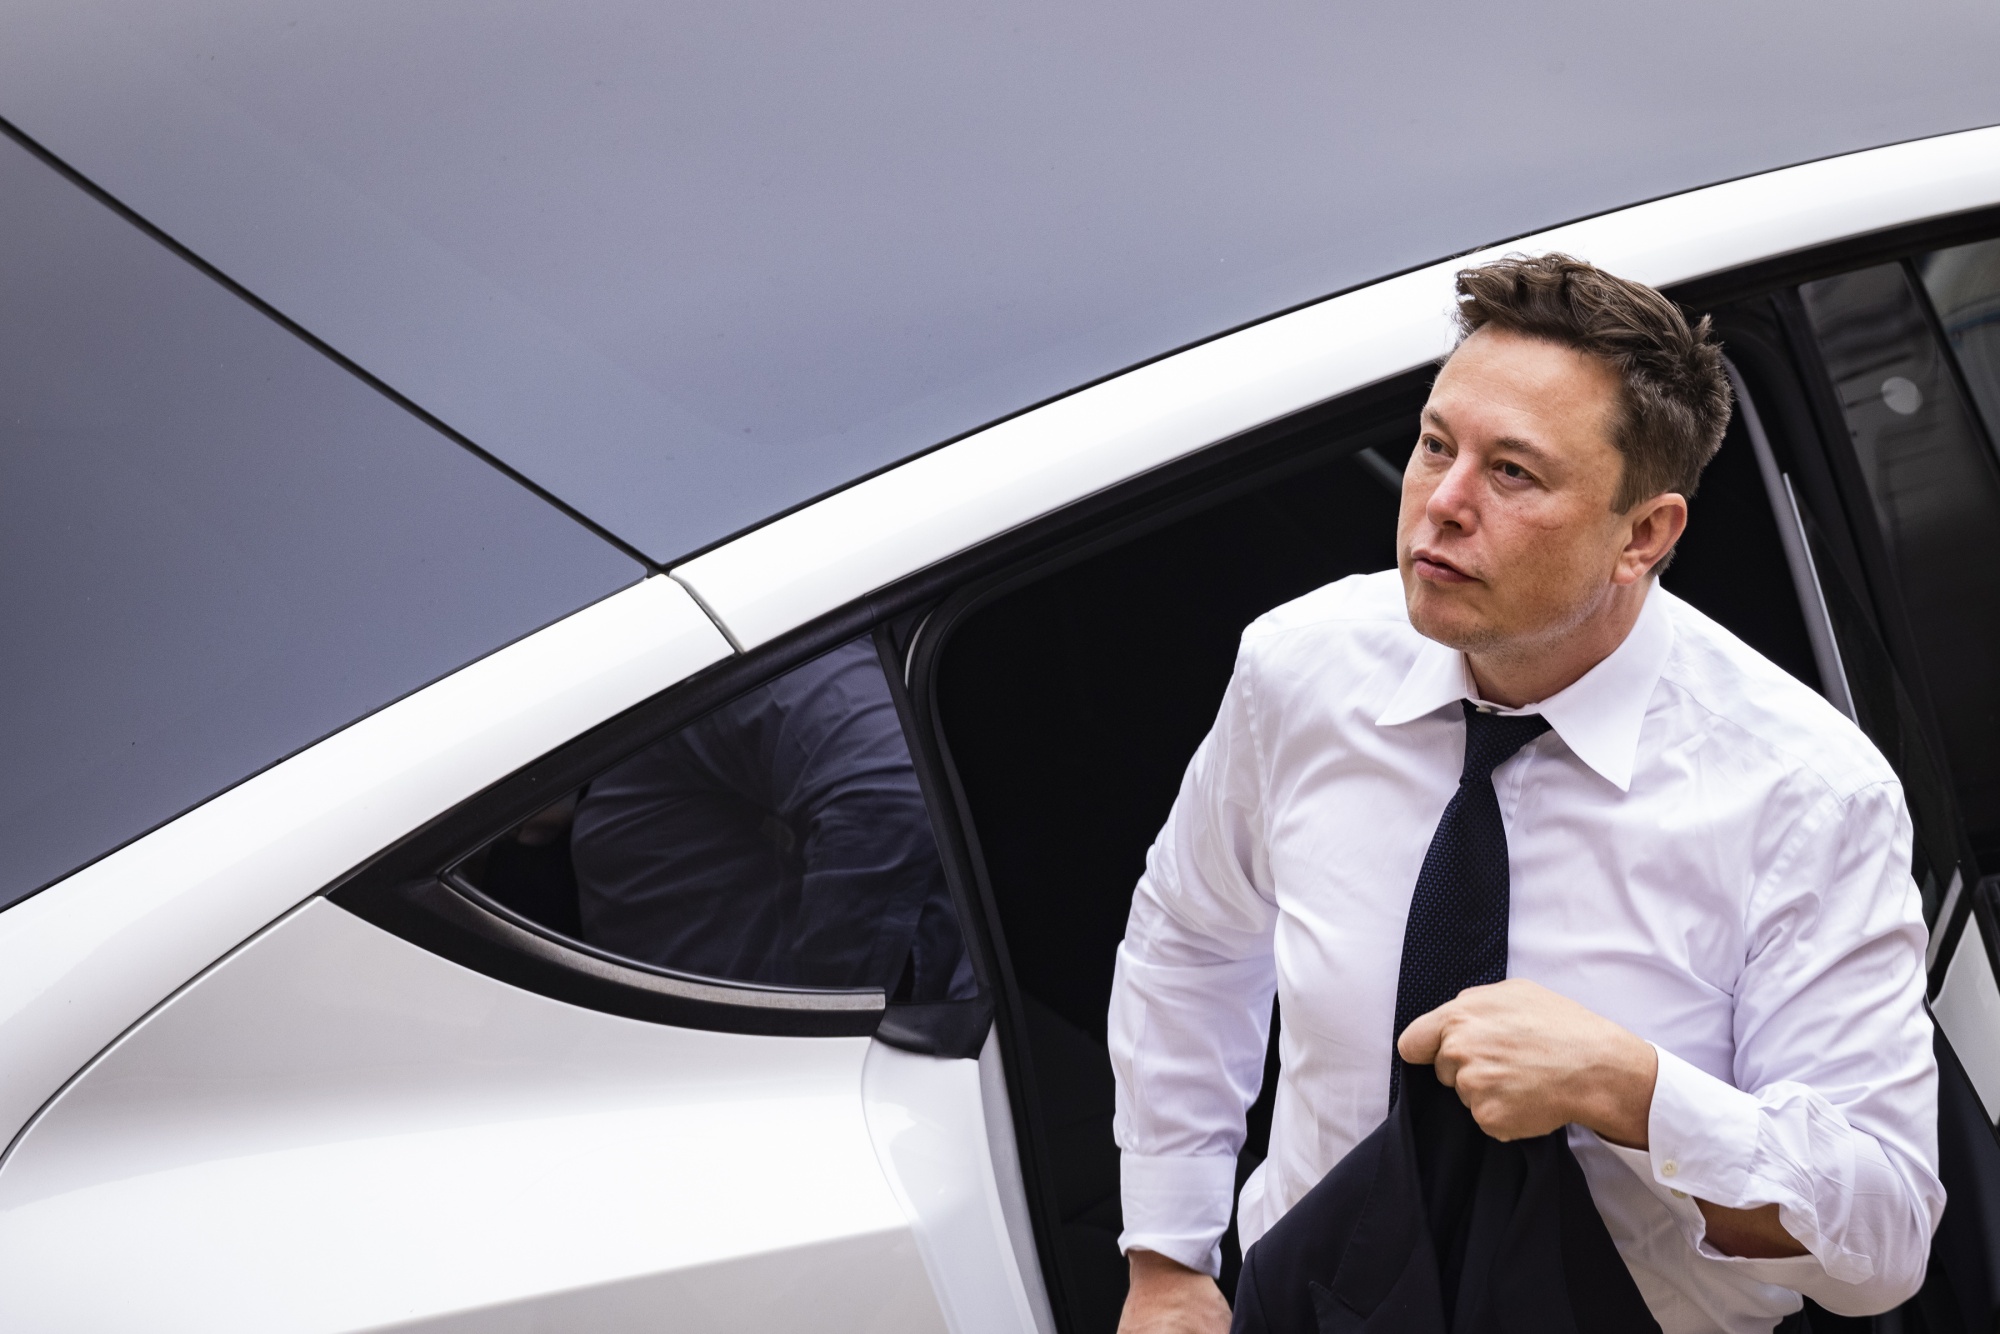 Elon Musk's Tightrope Walk How Tesla's Future Hangs in Balance Amid CEO's Controversies and Bold Moves--